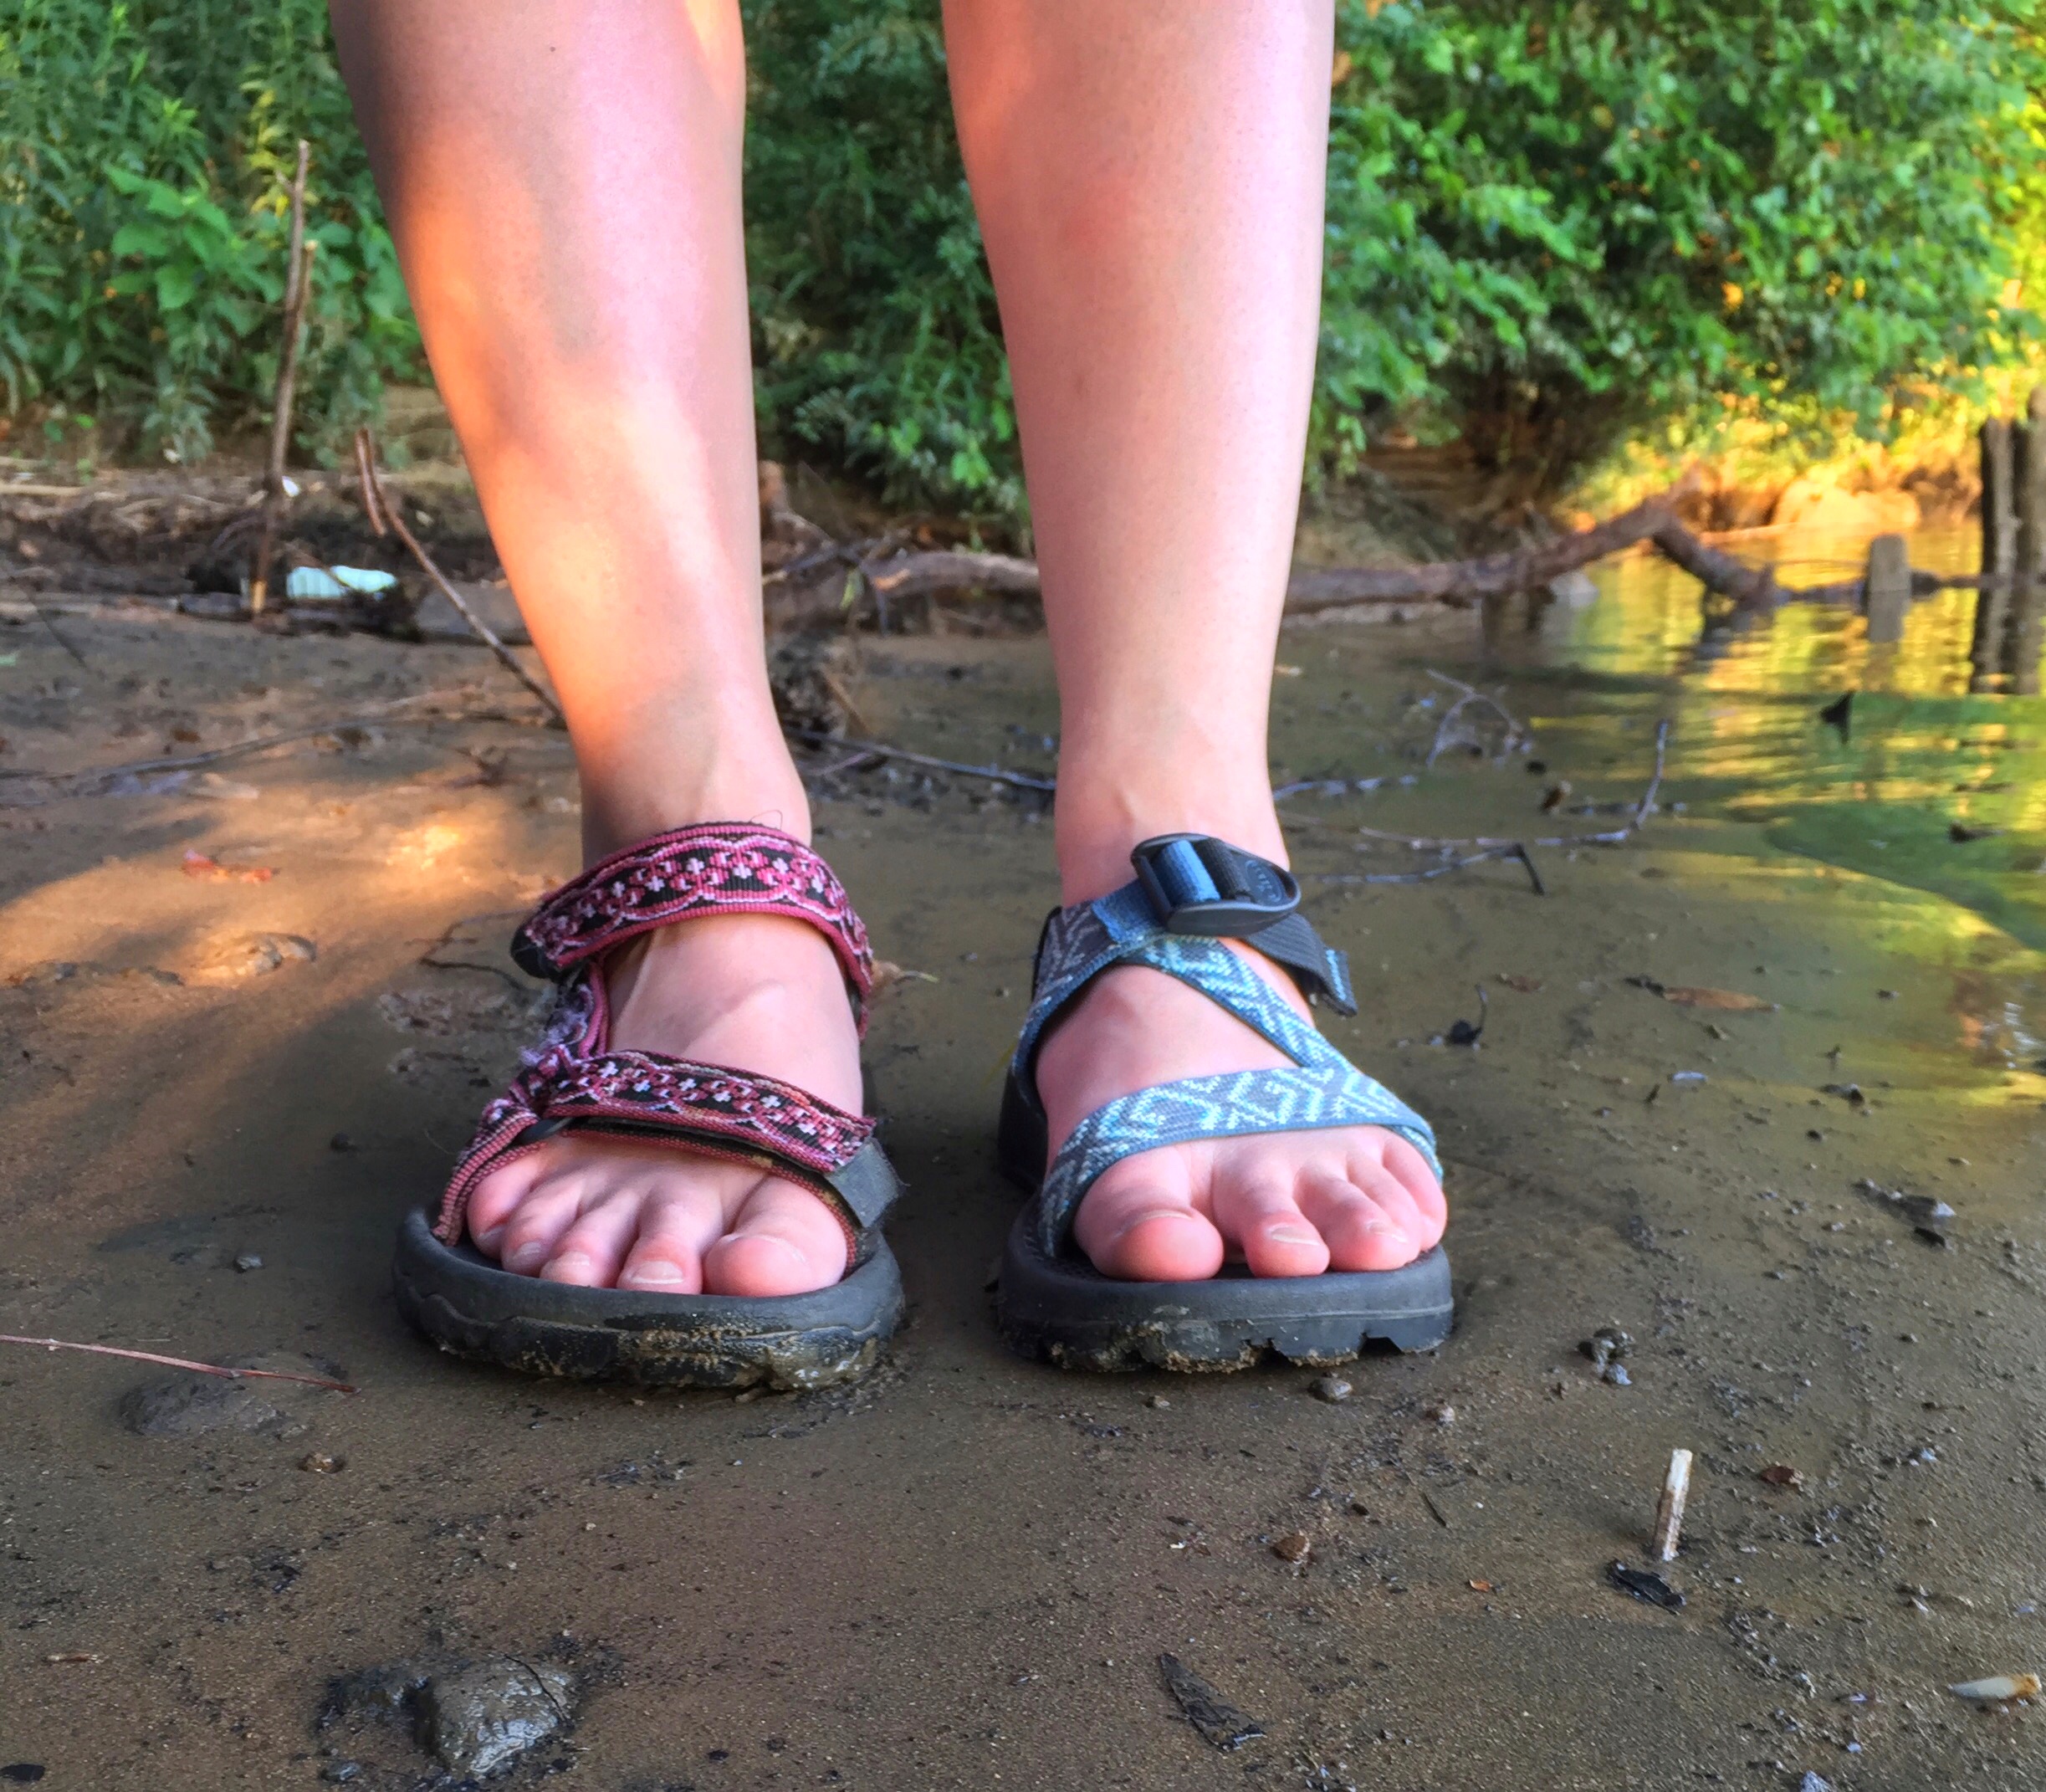 chacos or tevas